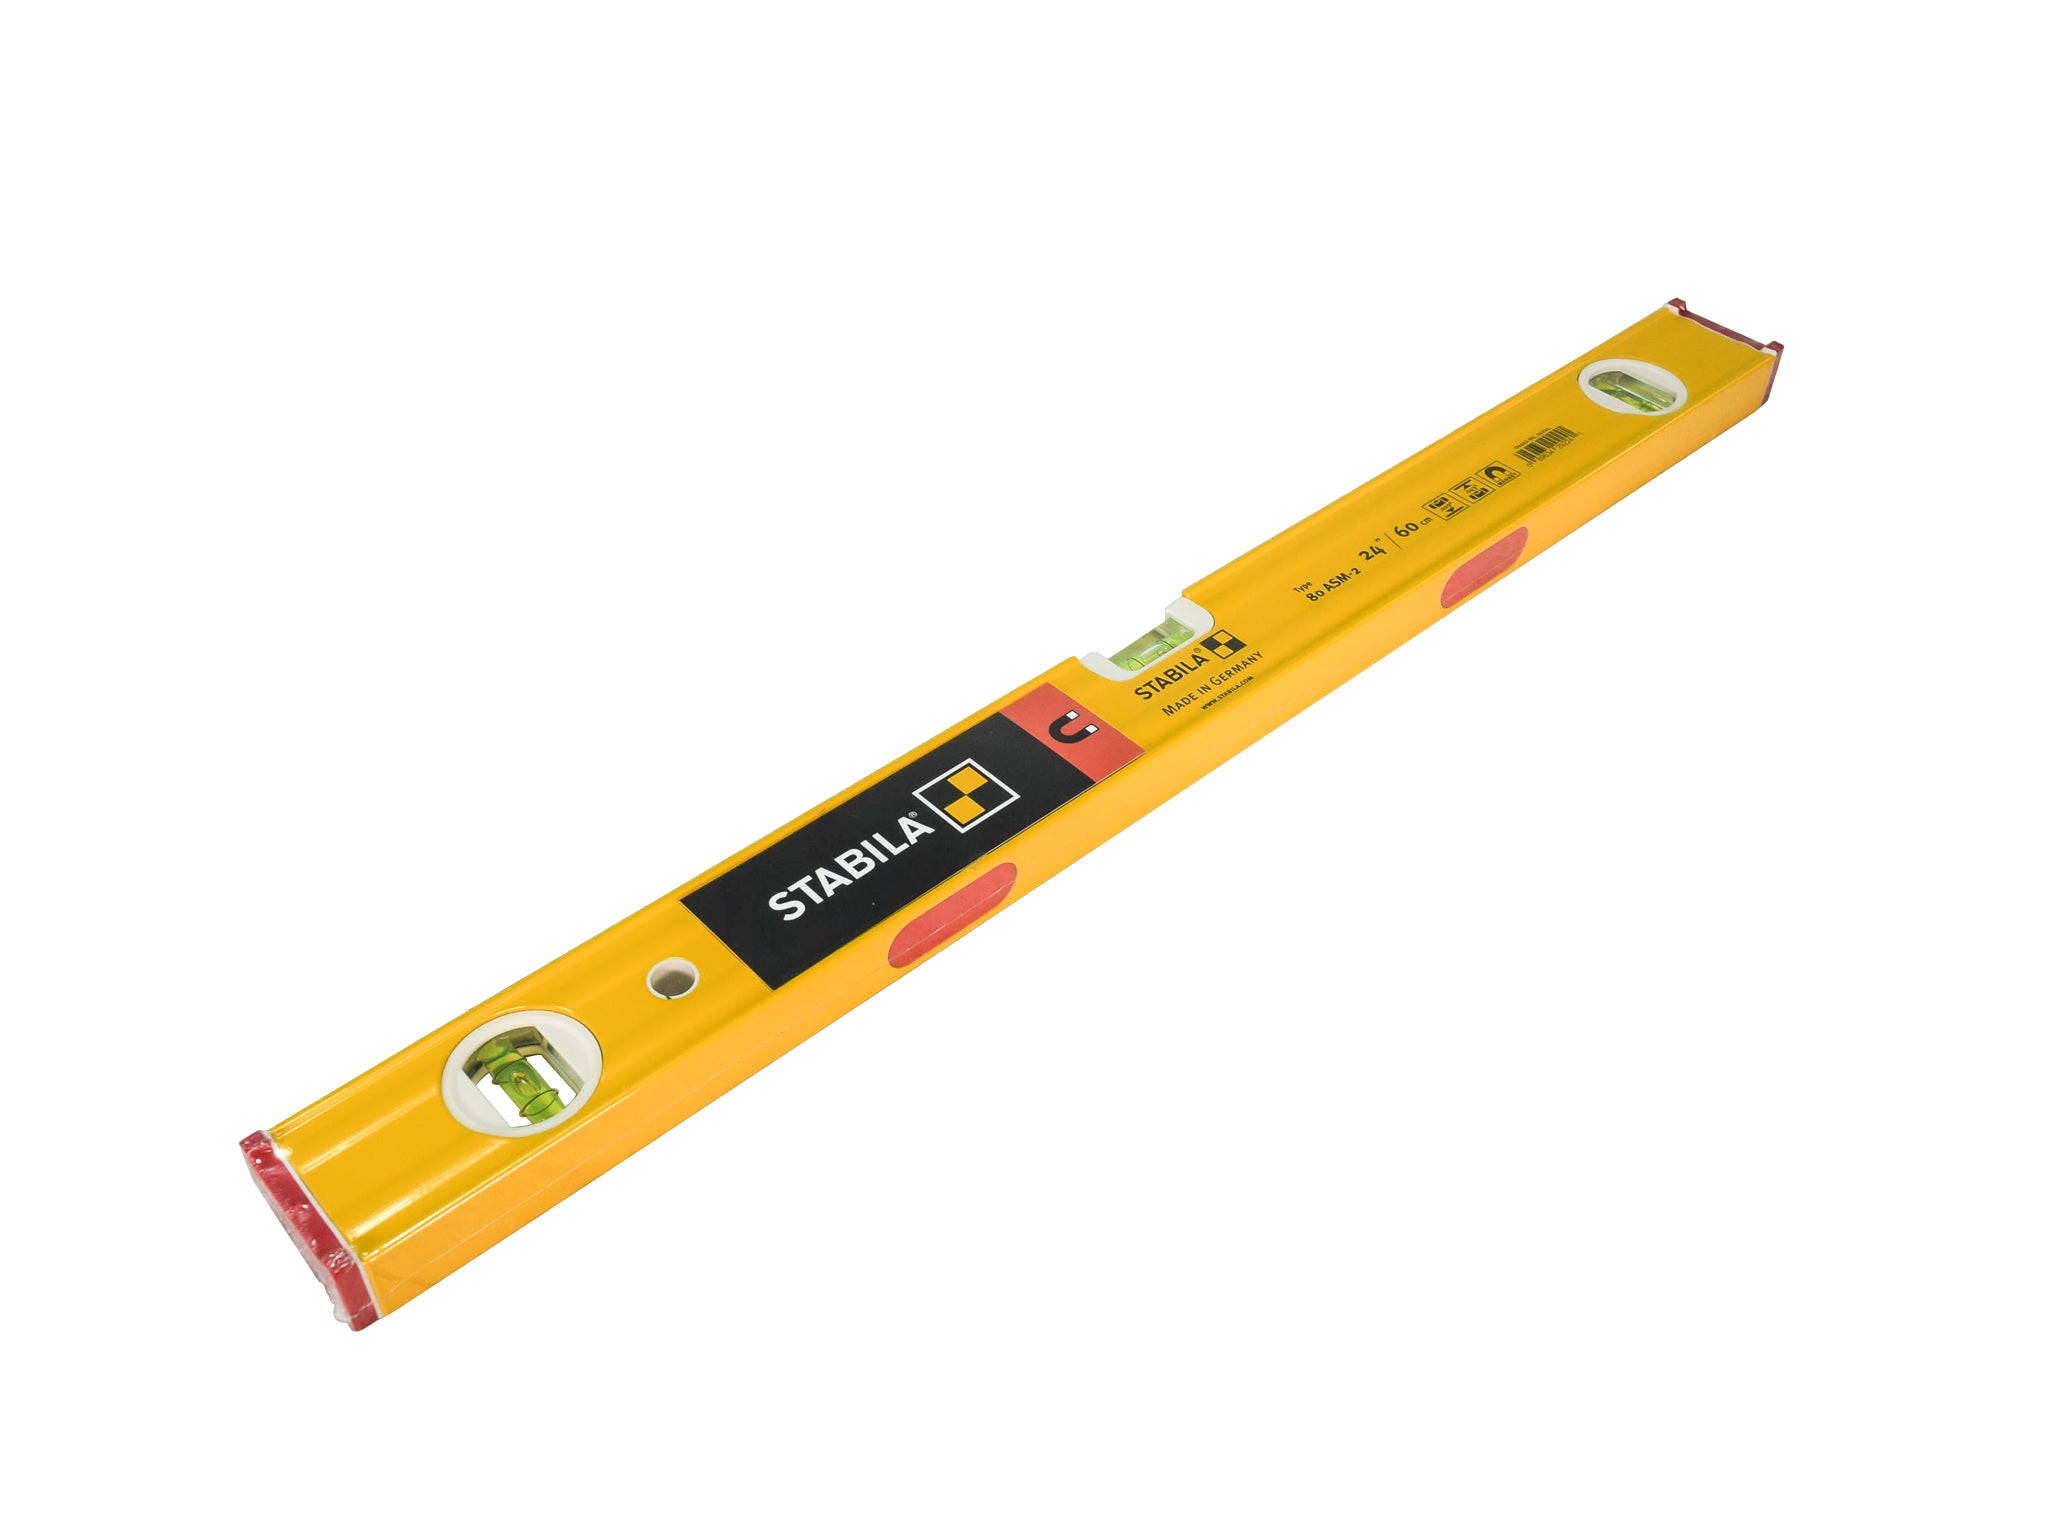 Stabila 29224 24" Type 80A-2M Magnetic Level